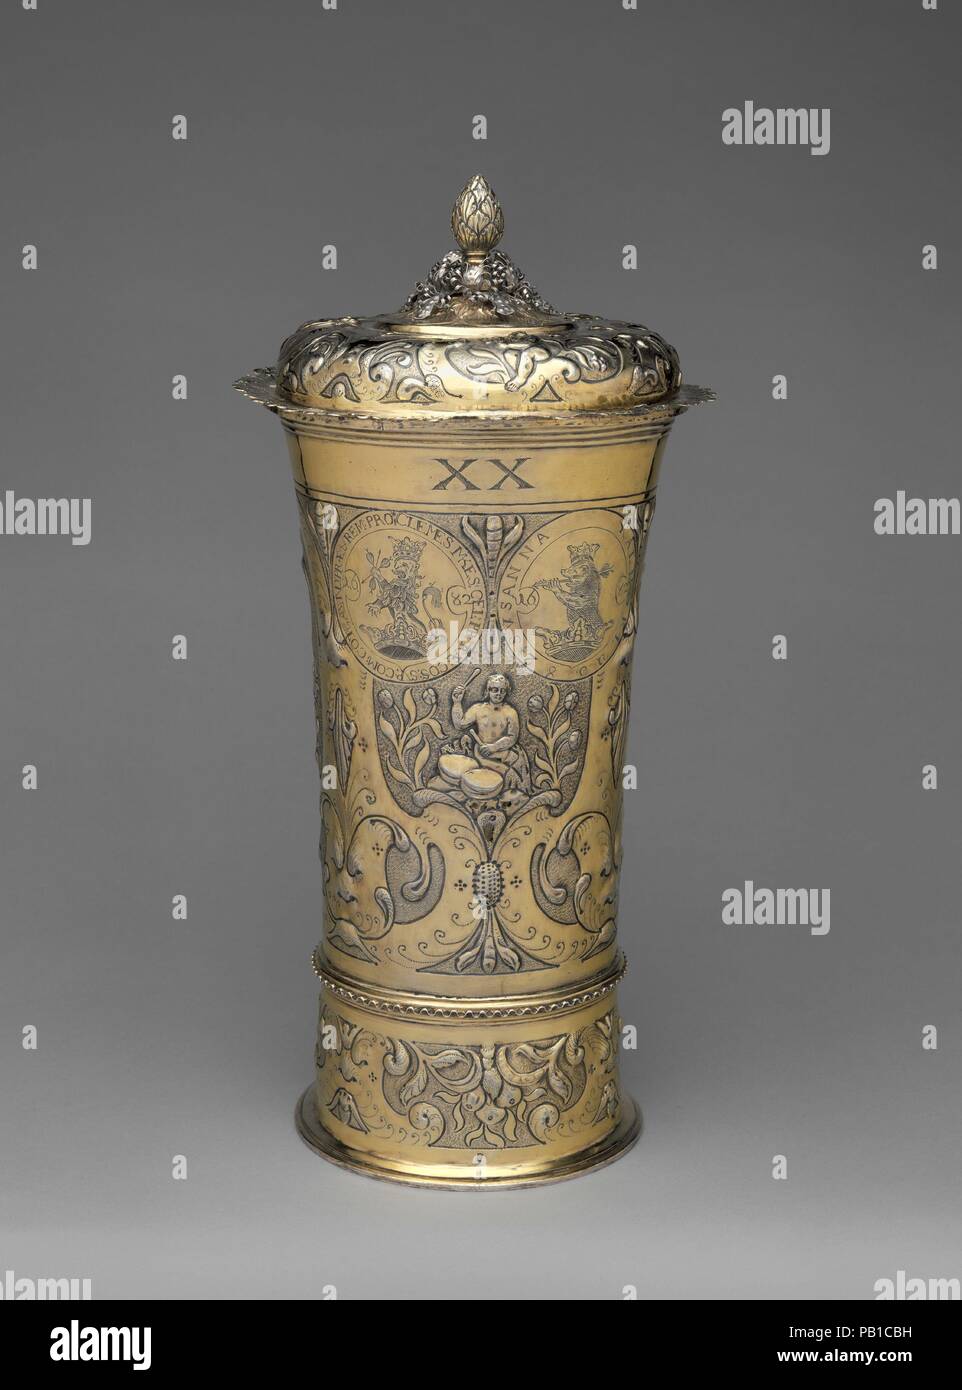 Footed beaker with cover. Culture: Hungarian, Brassó. Dimensions: Overall: 15 3/4 x 6 11/16 in. (40 x 17 cm). Maker: Johannes (Hans) Mautner (master 1670, died 1694). Date: 1682.  This monumental beaker is the one of the largest known of its type. It has a hollow base and an undulating ring that marks the actual bottom of the vessel on the outside. Both of these features are characteristic of Hungarian and Transylvanian production. The inscribed coat of arms at left indicates that it belonged to a member of a princely Transylvanian family, Count Mikes, who came from one of the most ancient dyn Stock Photo